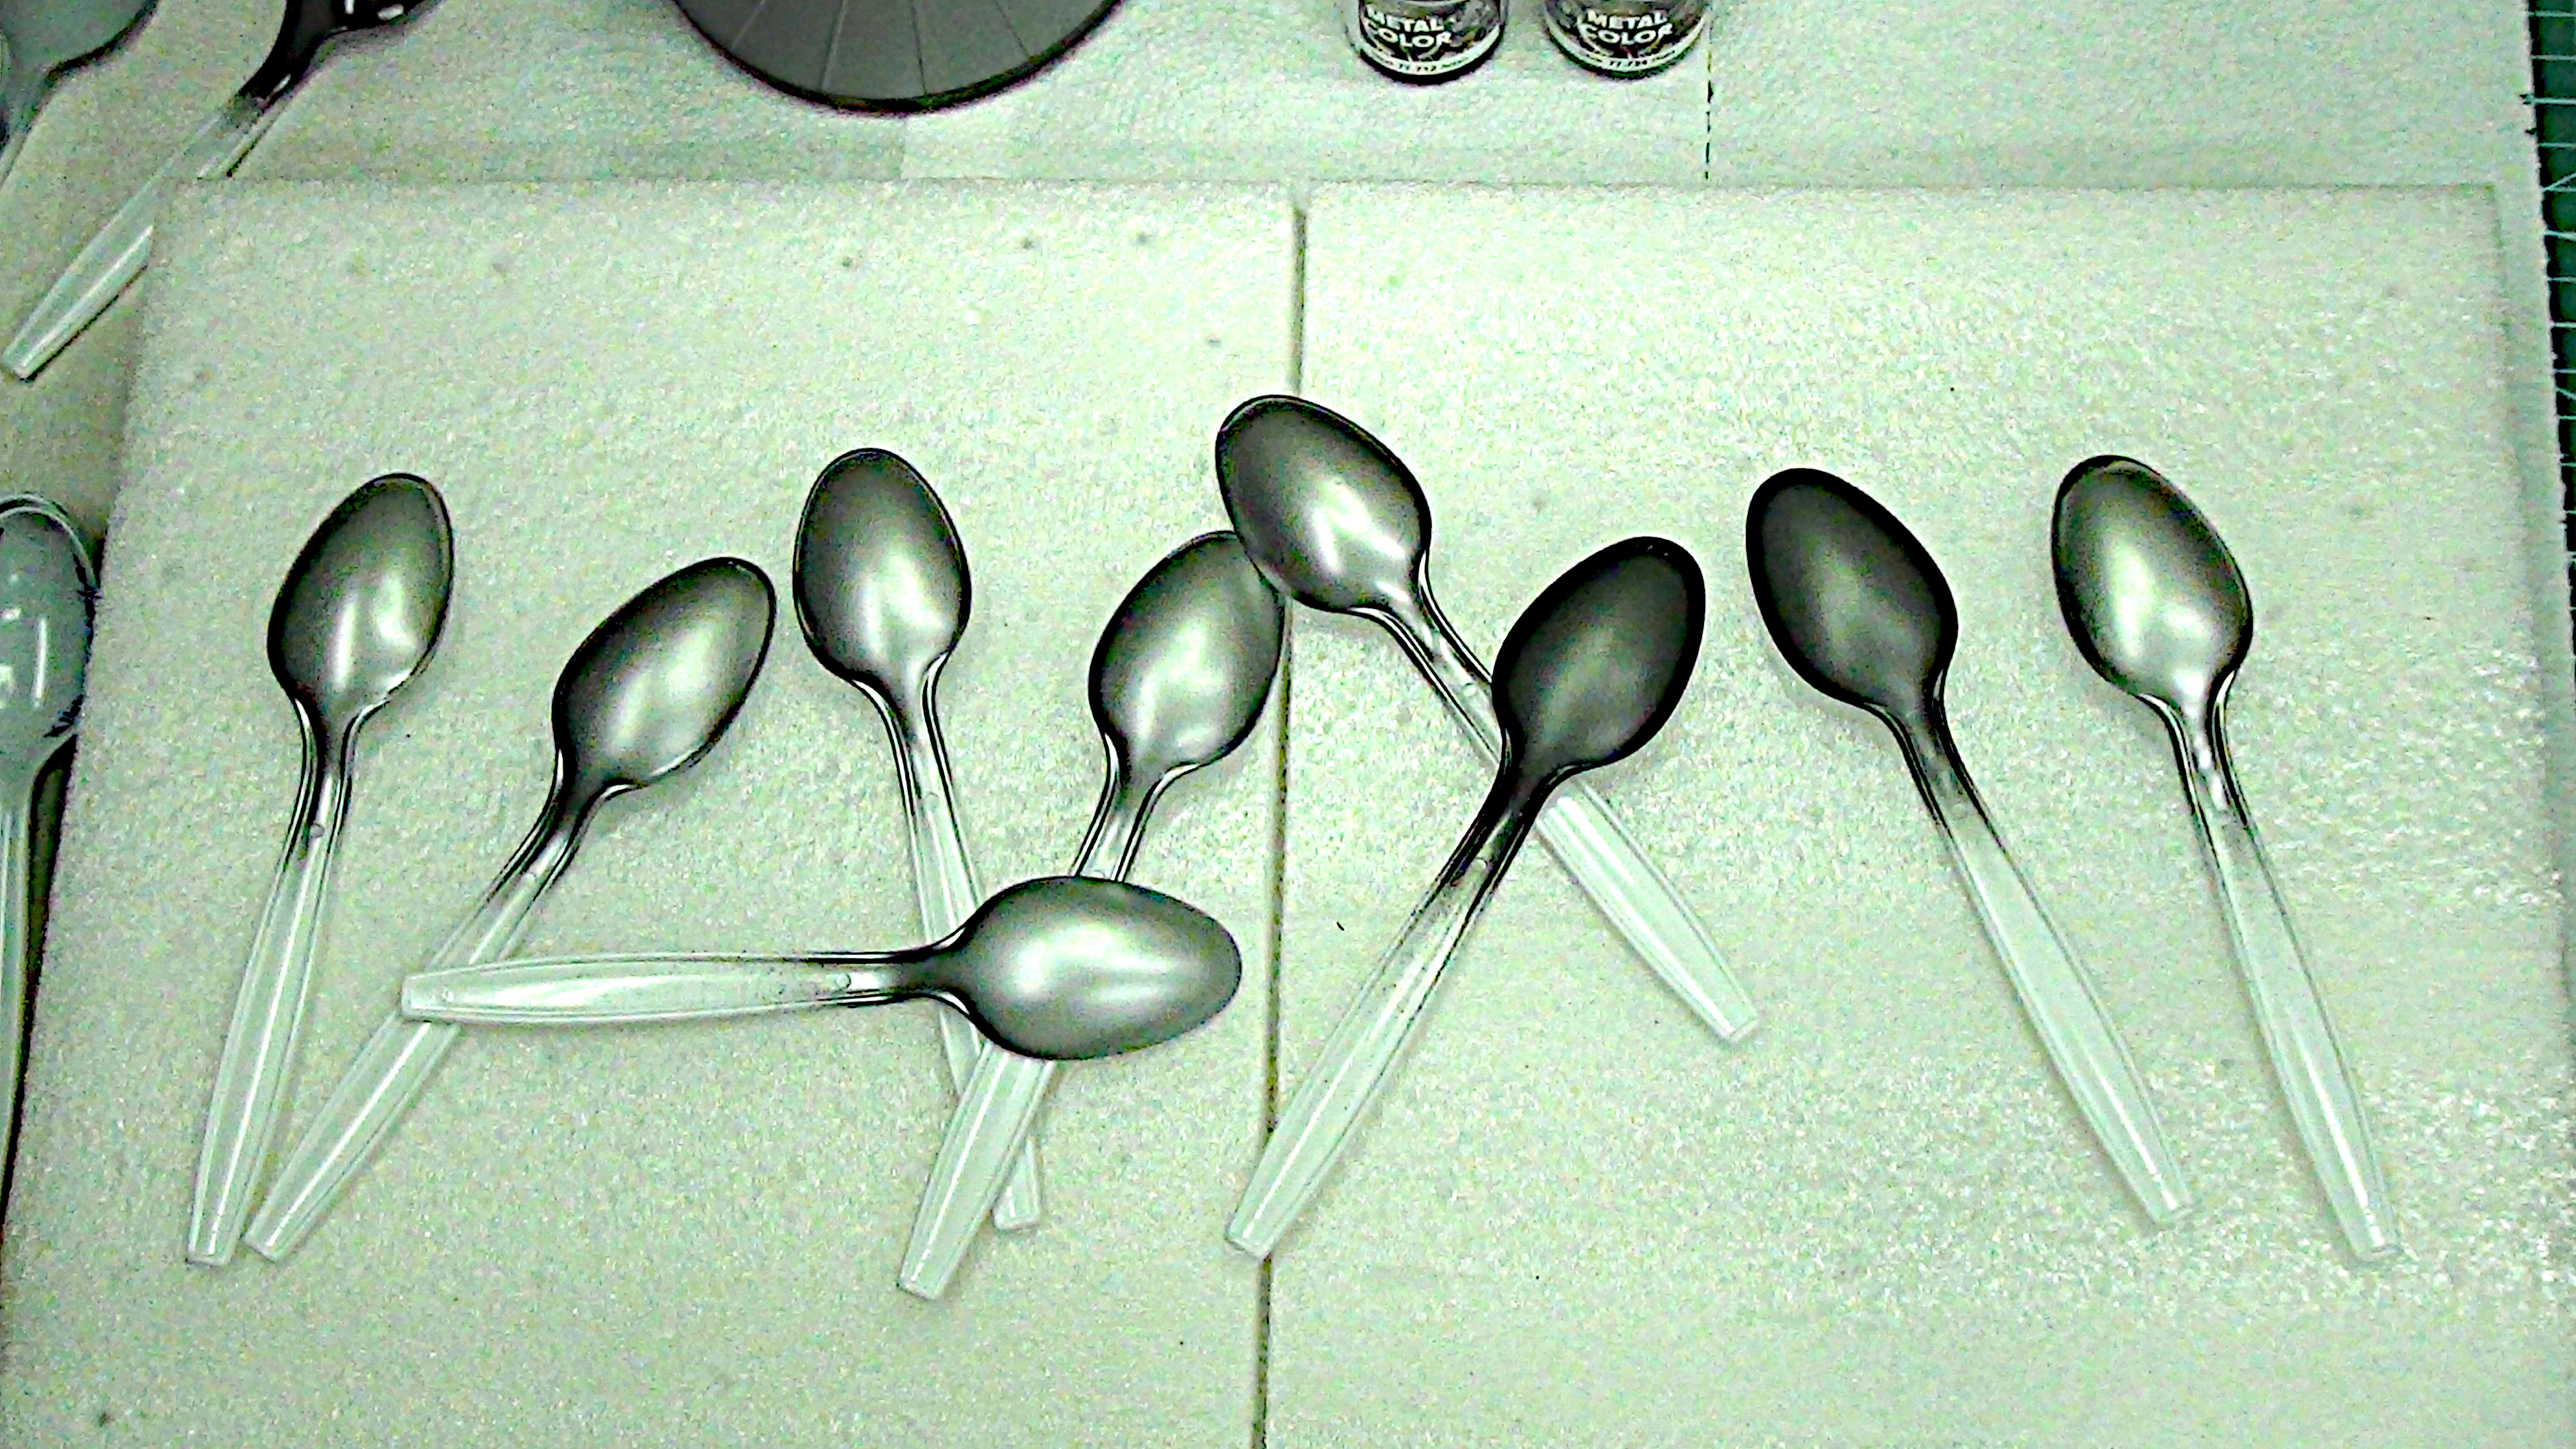 Misc. test spoons for body color